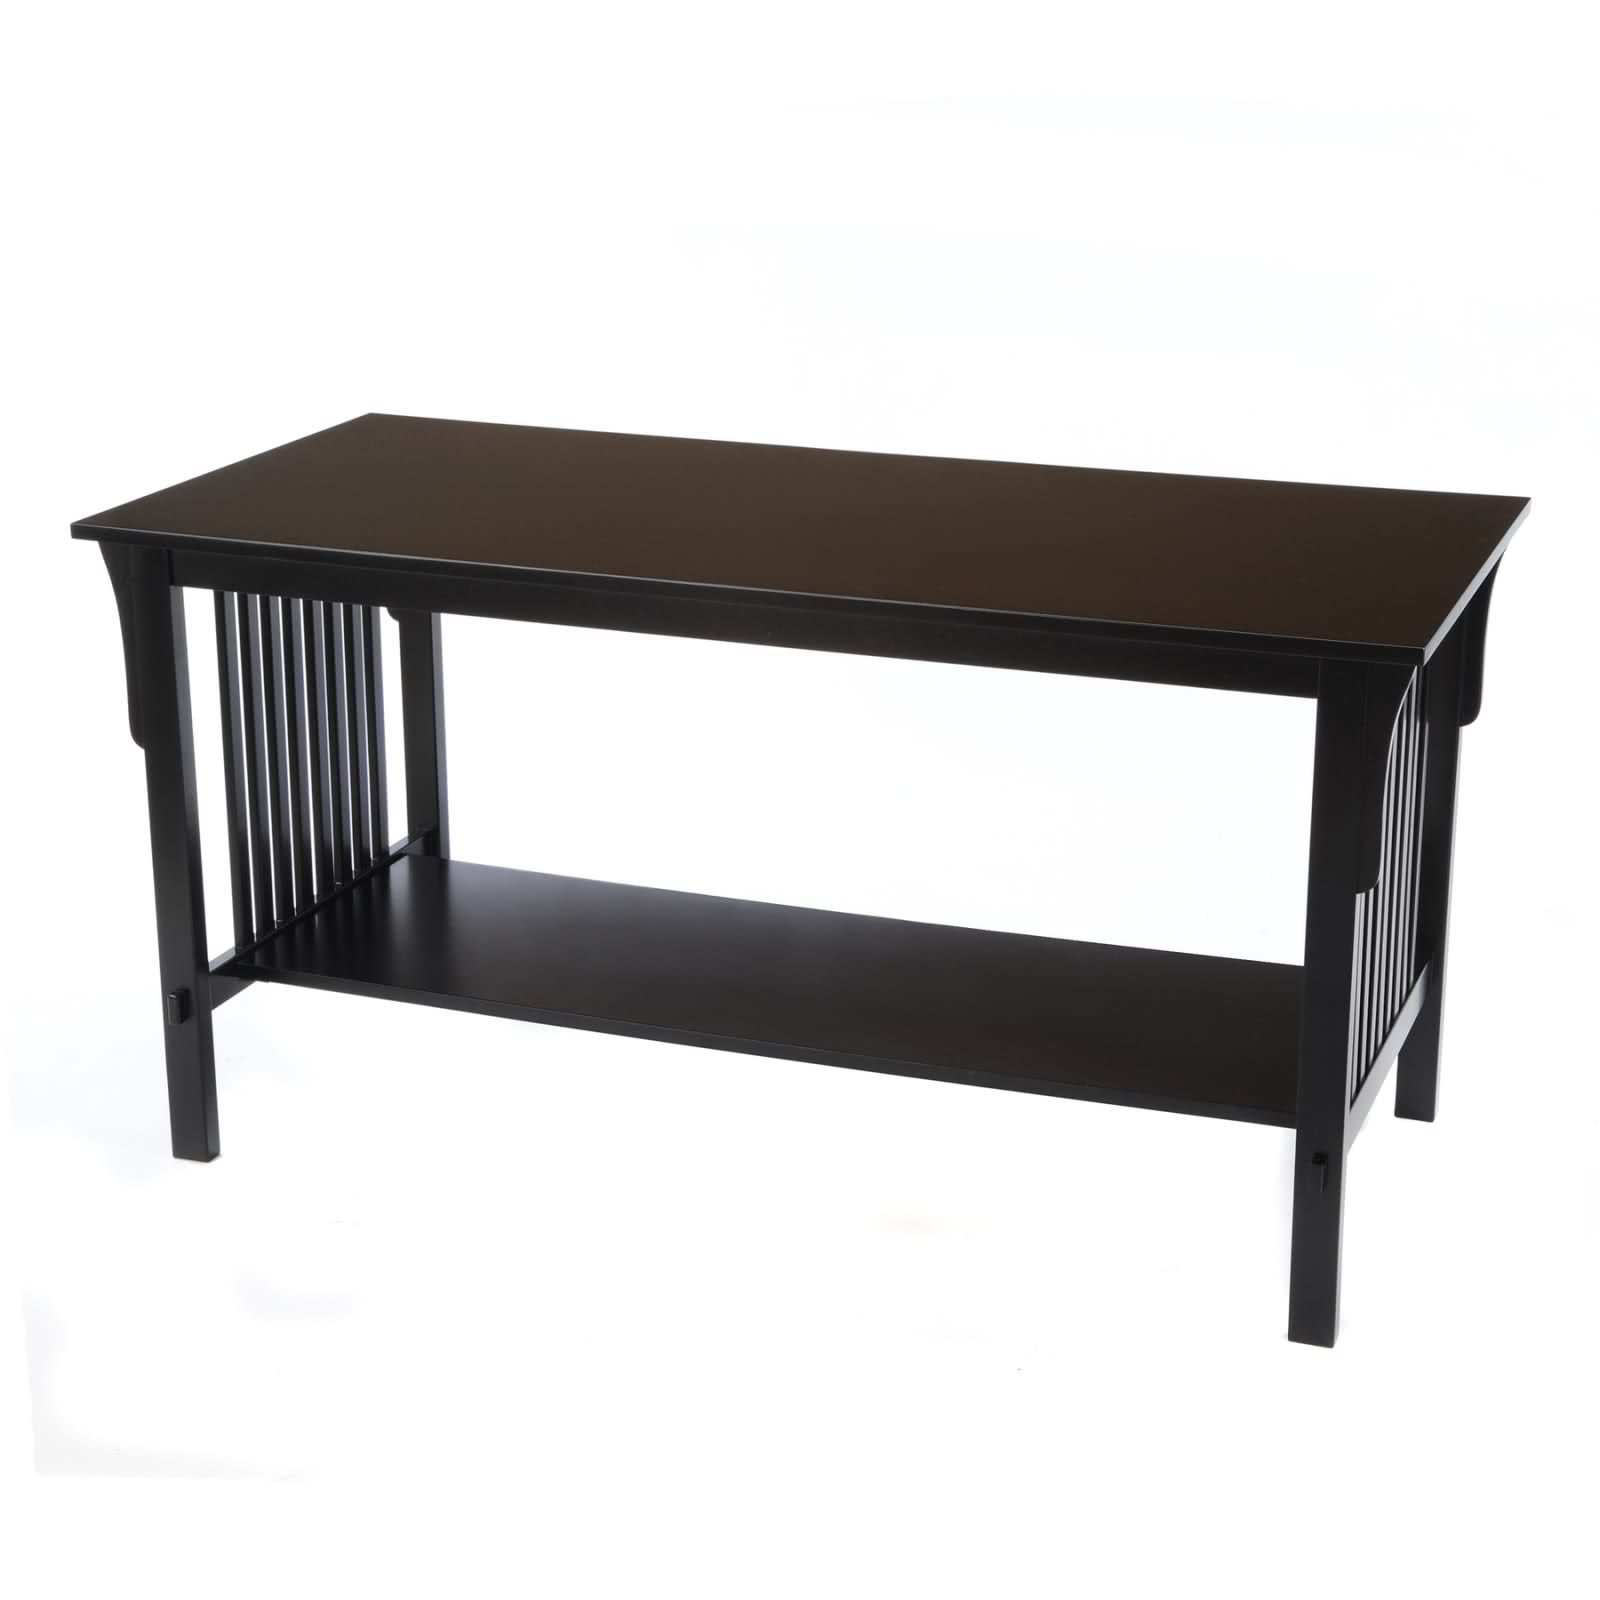 Bay Shore Collection Mission Coffee Table - Black title=